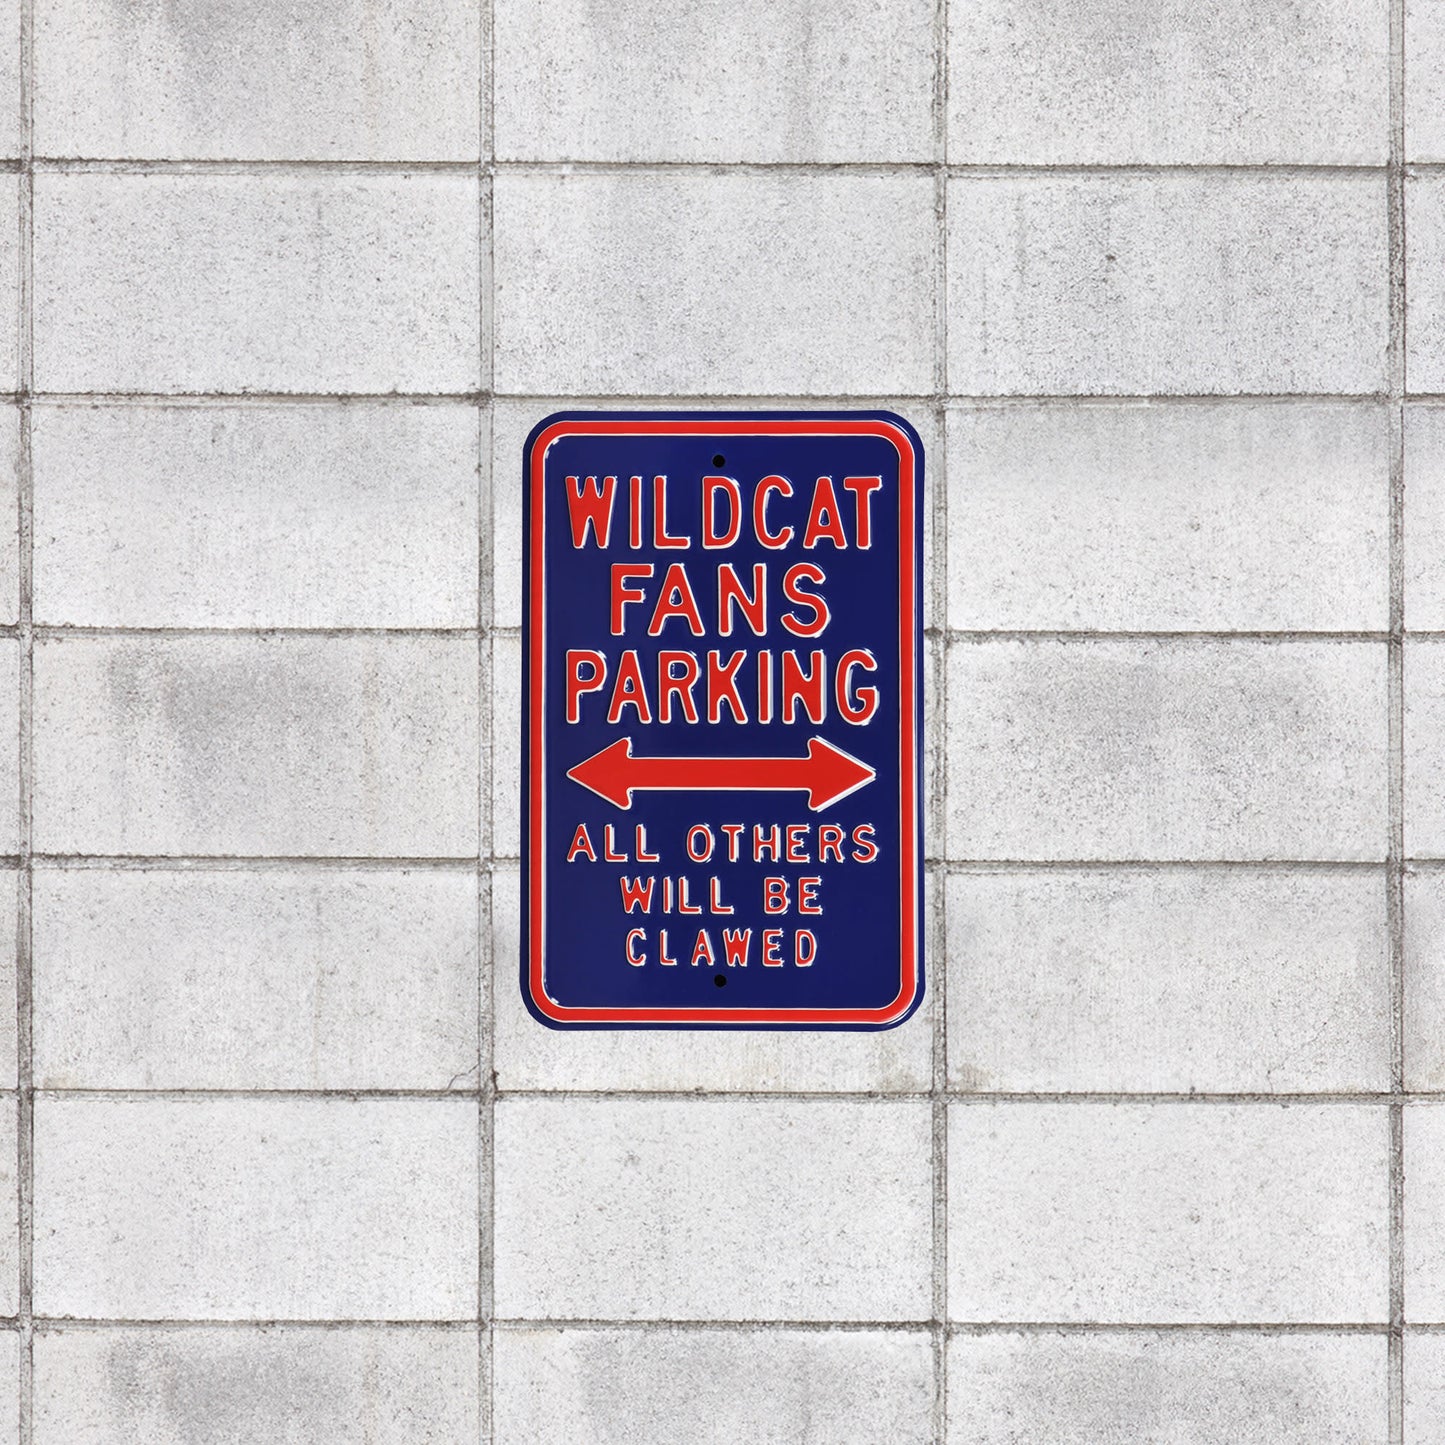 Arizona Wildcats: Clawed Parking - Officially Licensed Metal Street Sign